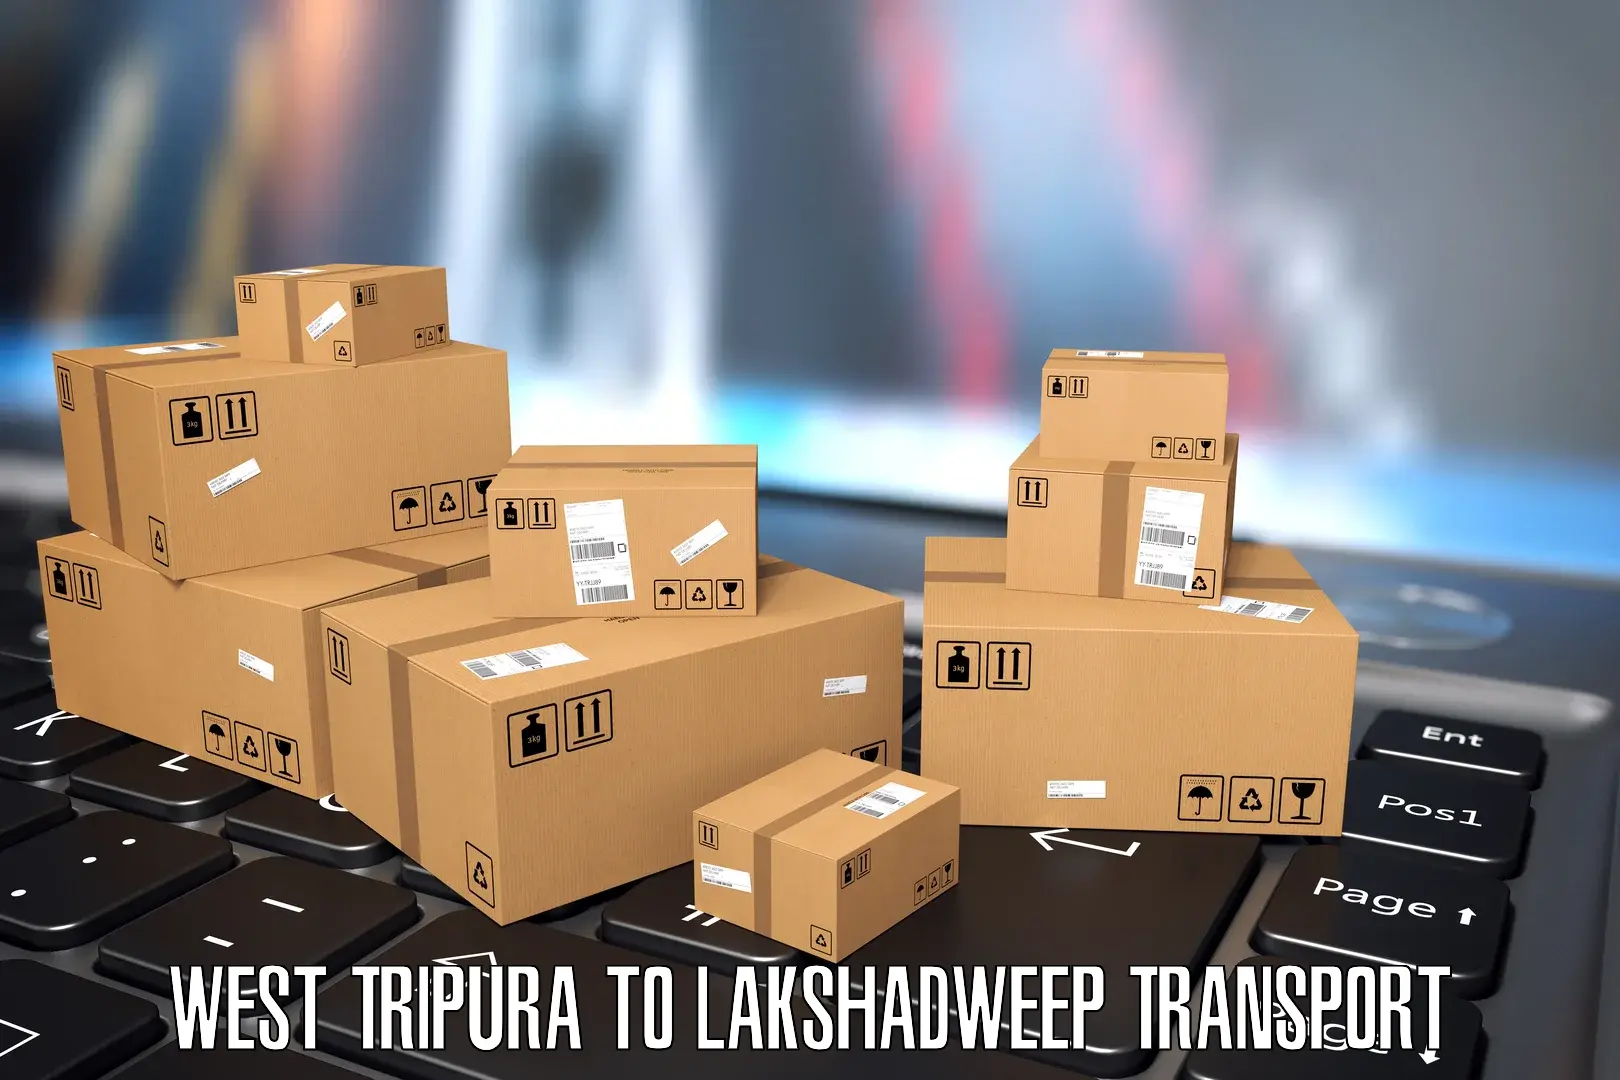 Commercial transport service West Tripura to Lakshadweep